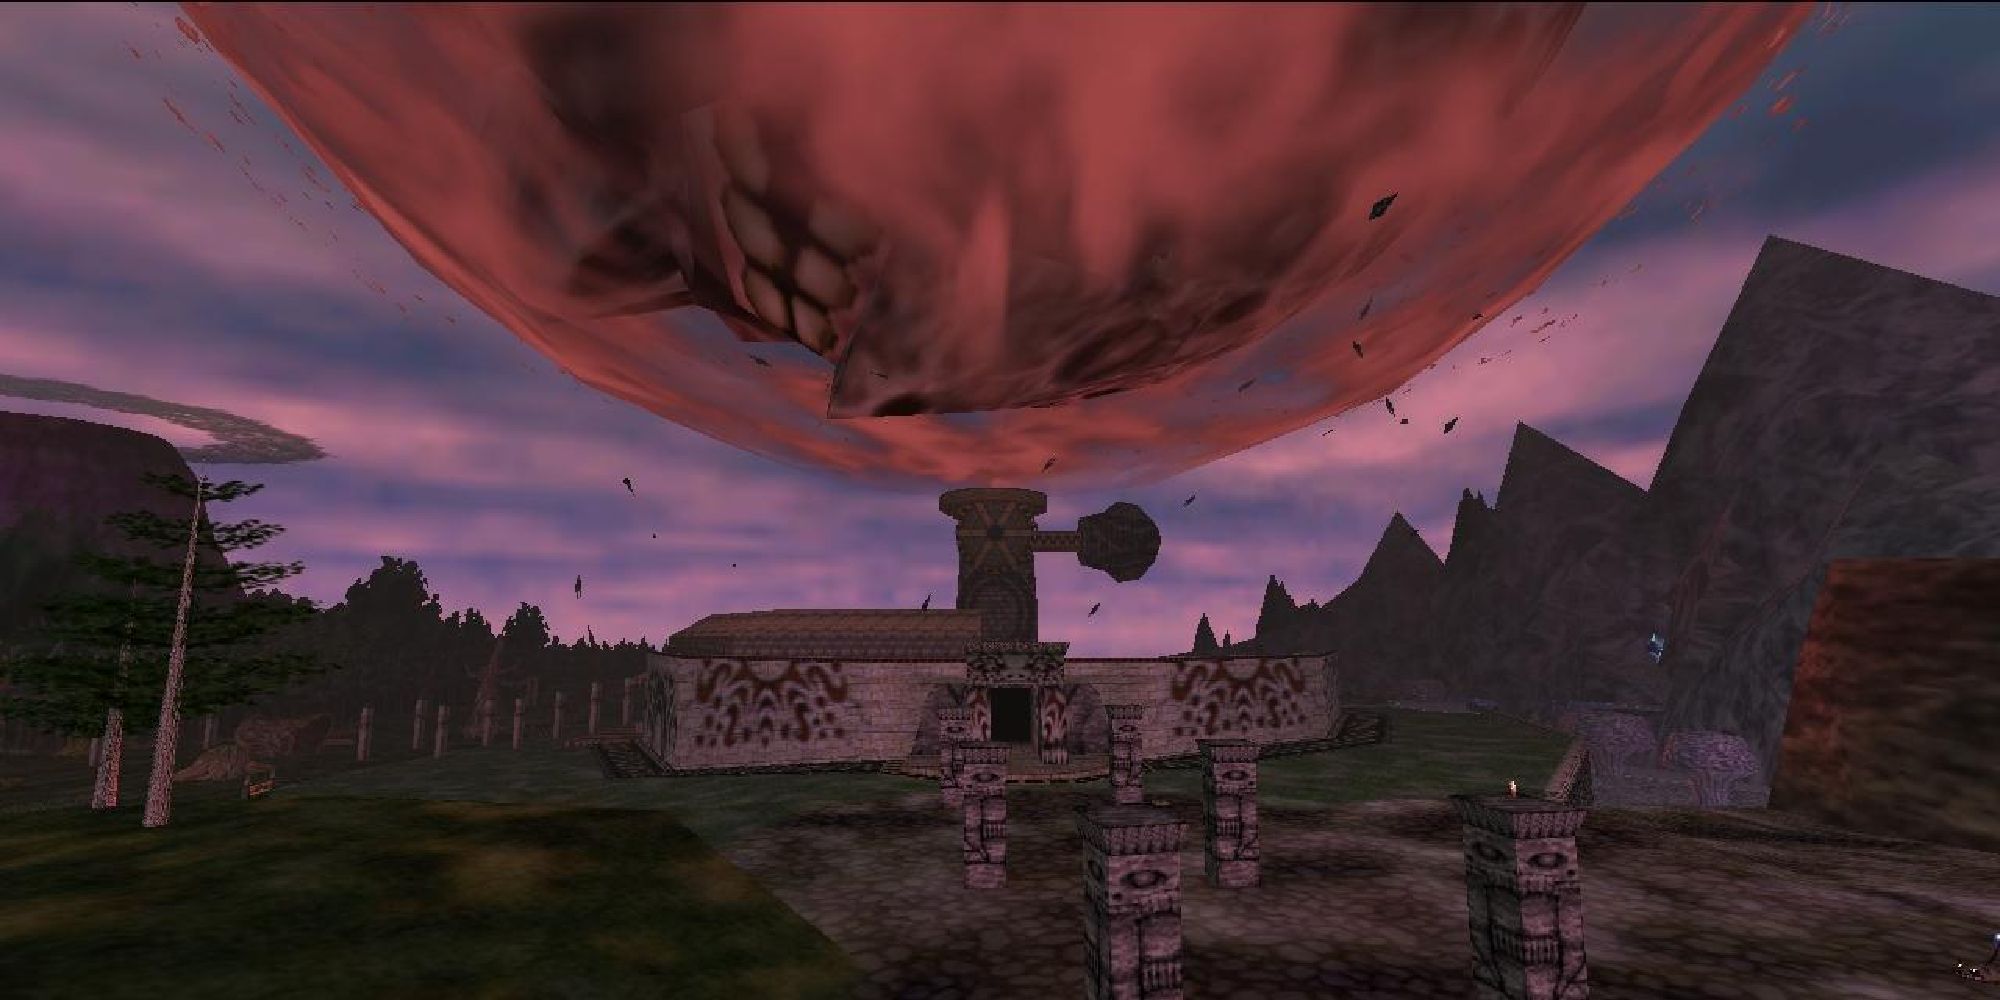 The Moon destroying Termina in Majora's Mask